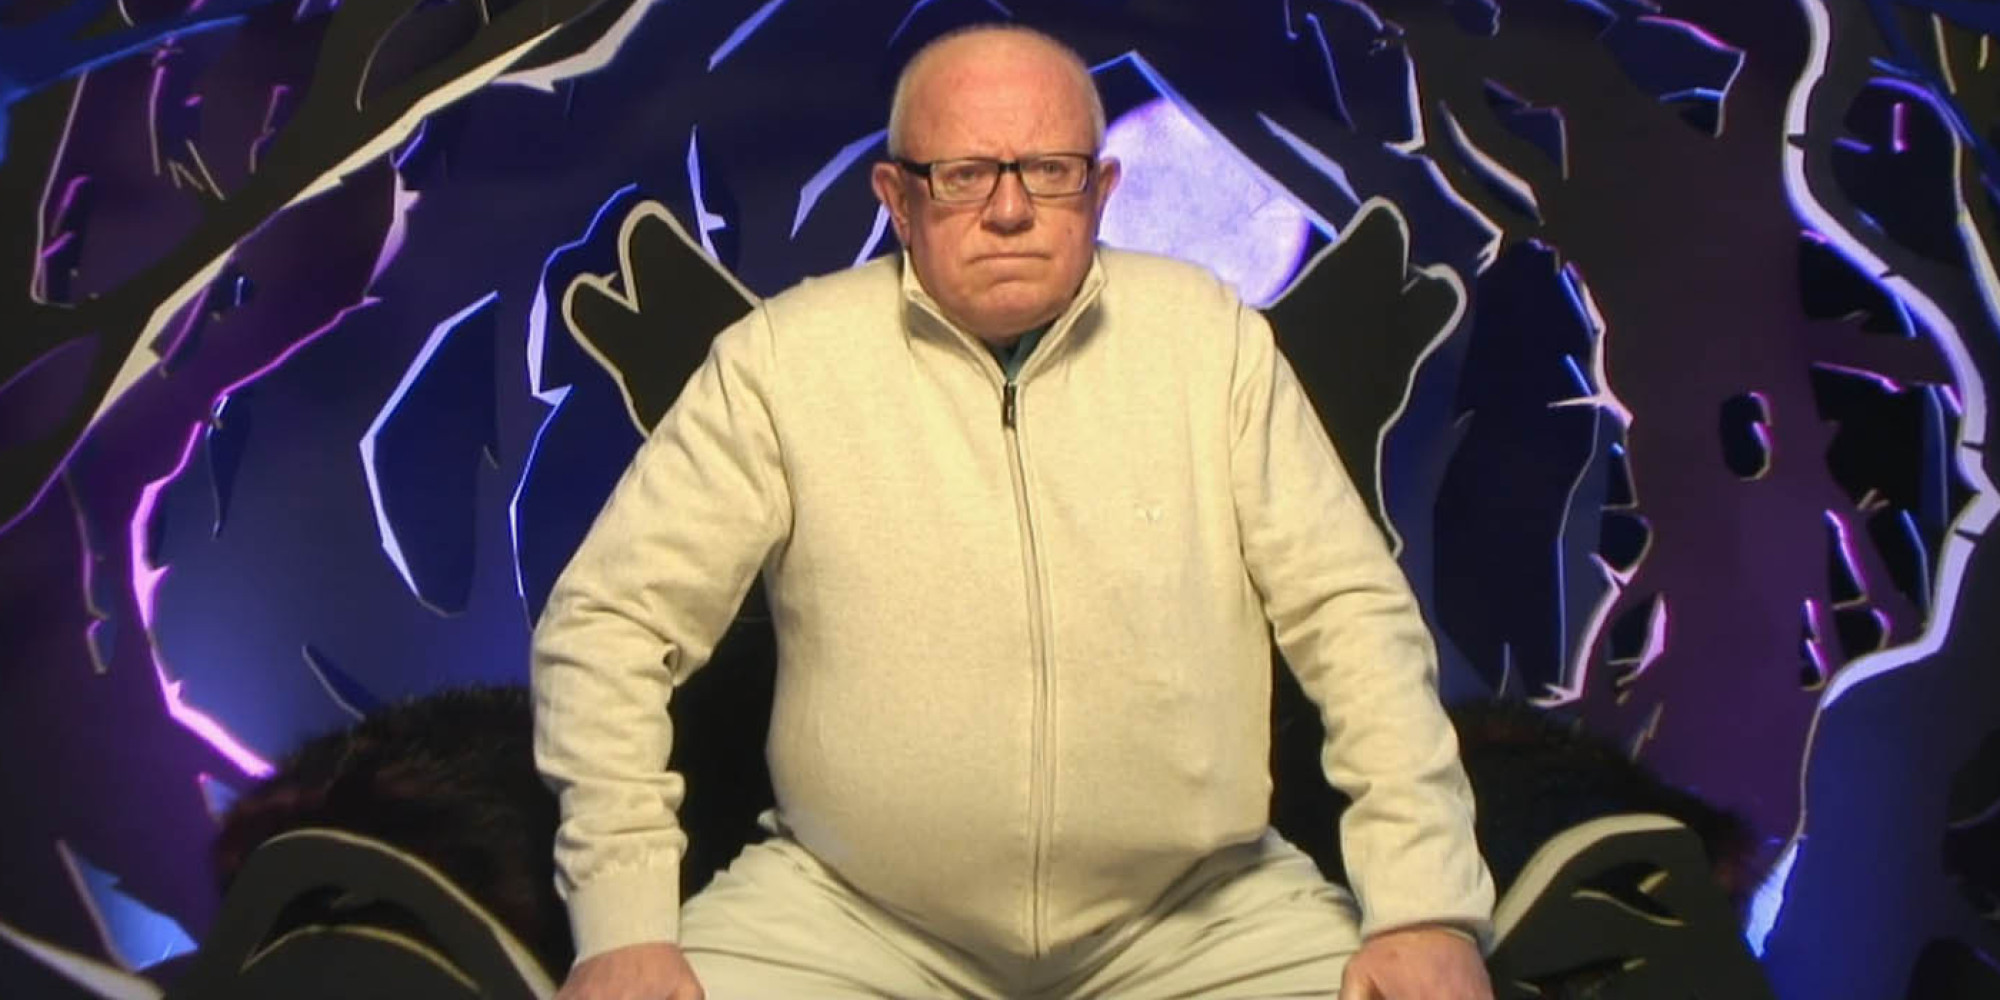 Ken Morley Given Official Warning By Celebrity Big Brother Producers Over Racist And Sexist